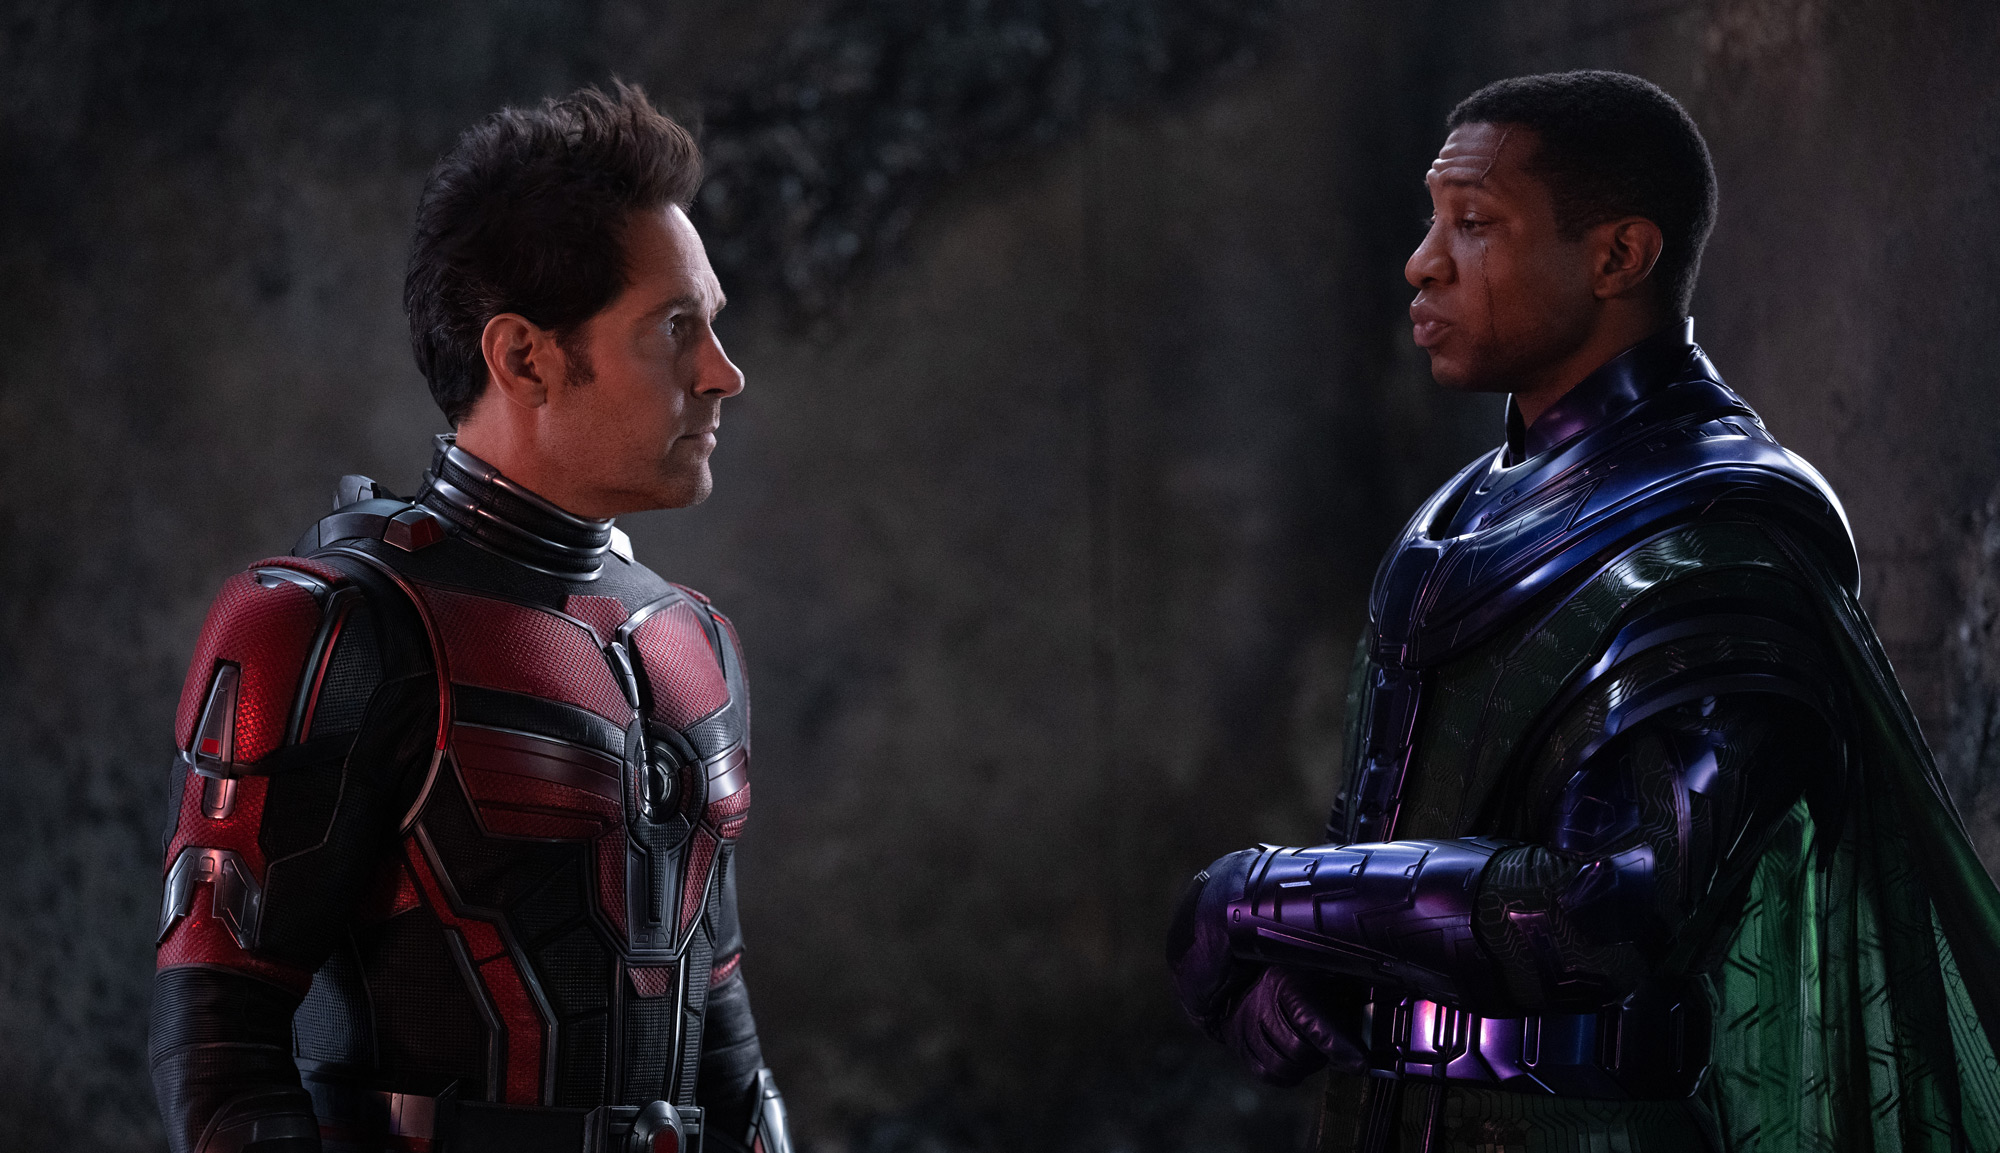 Paul Rudd and Jonathan Majors in "Ant-Man and the Wasp: Quantumania"